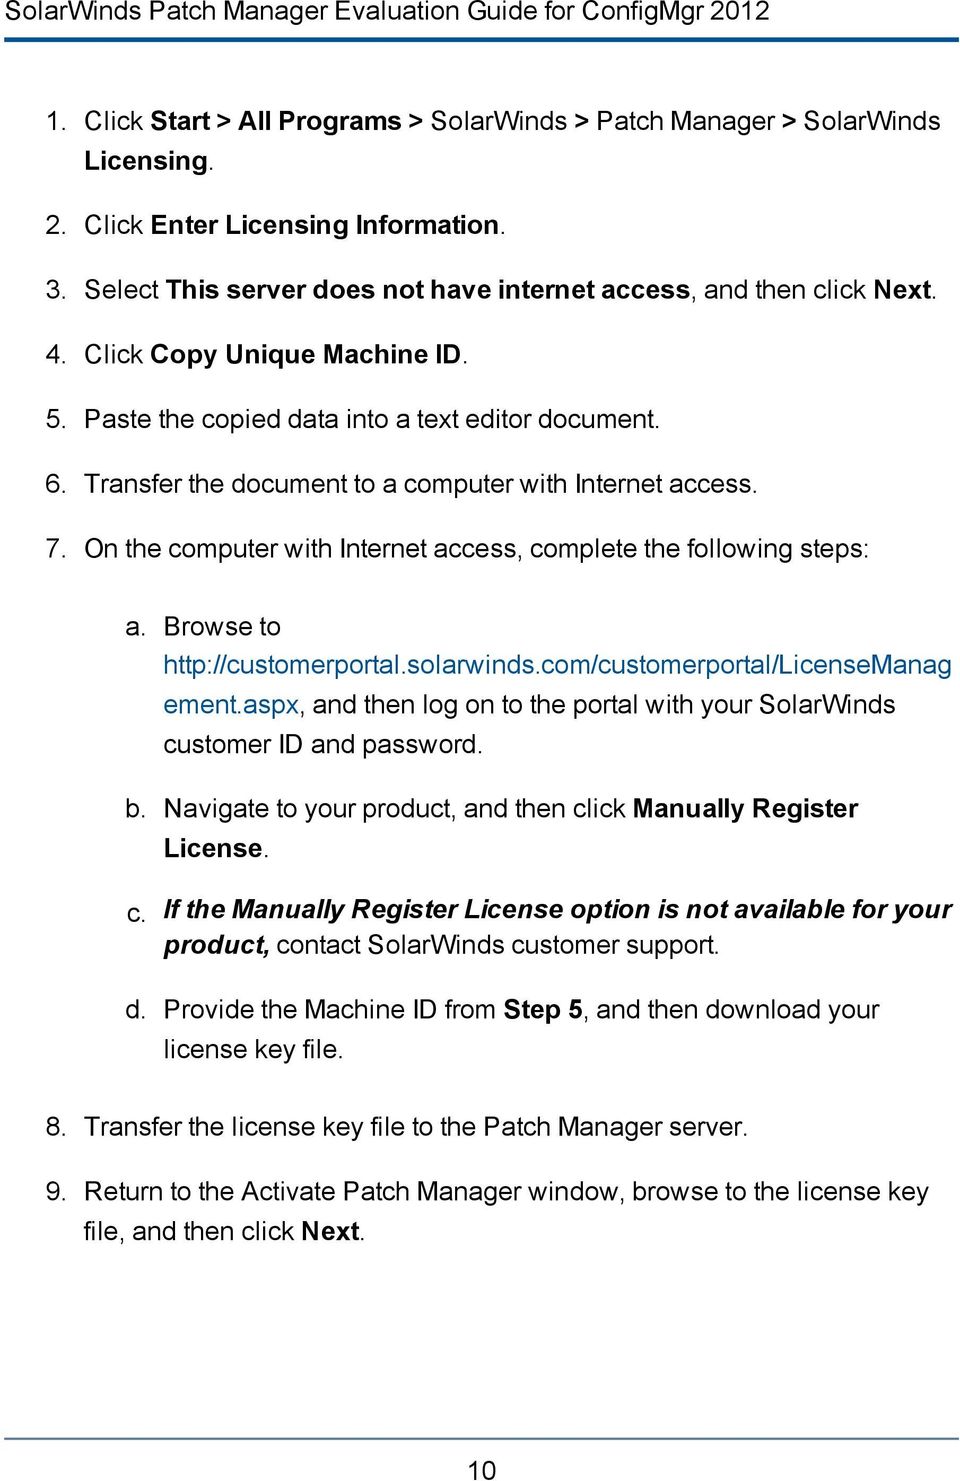 Transfer the document to a computer with Internet access. 7. On the computer with Internet access, complete the following steps: a. Browse to http://customerportal.solarwinds.